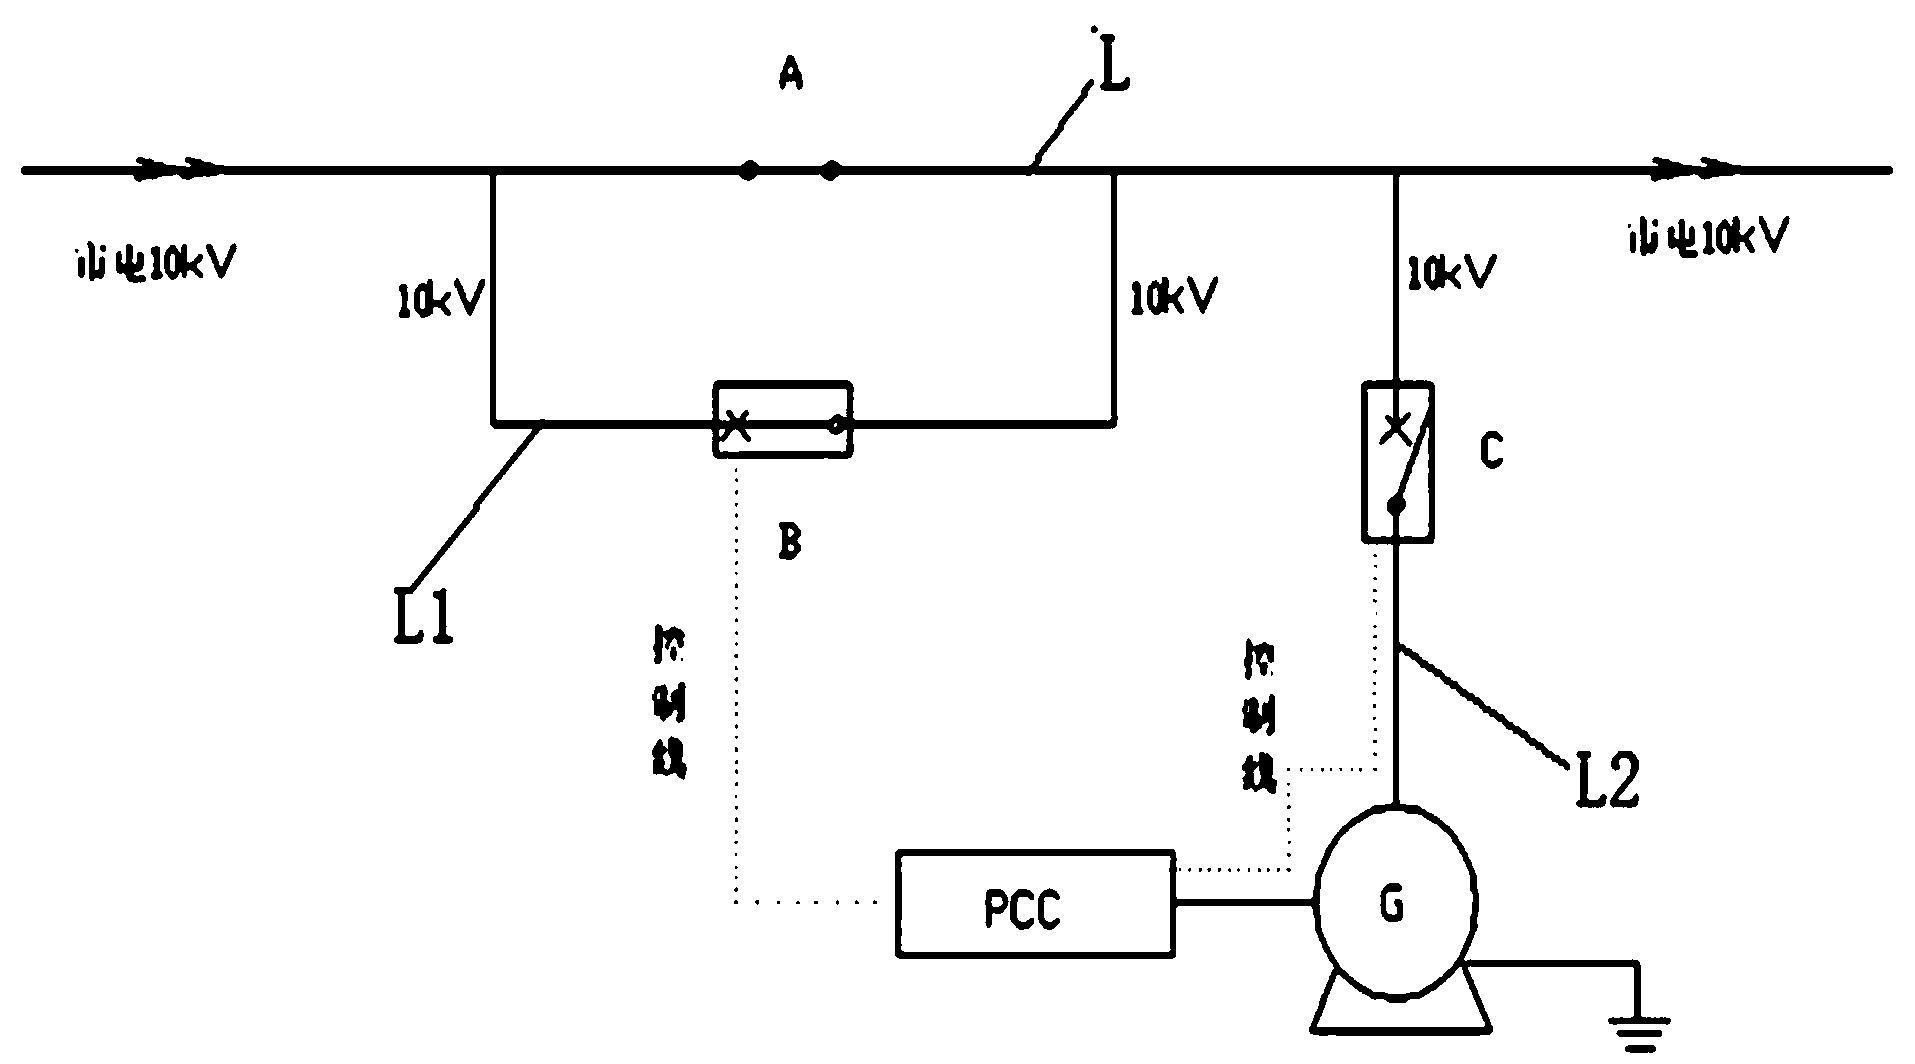 Method for making mobile power generation system be connected into power grid for operation in synchronous grid connection mode